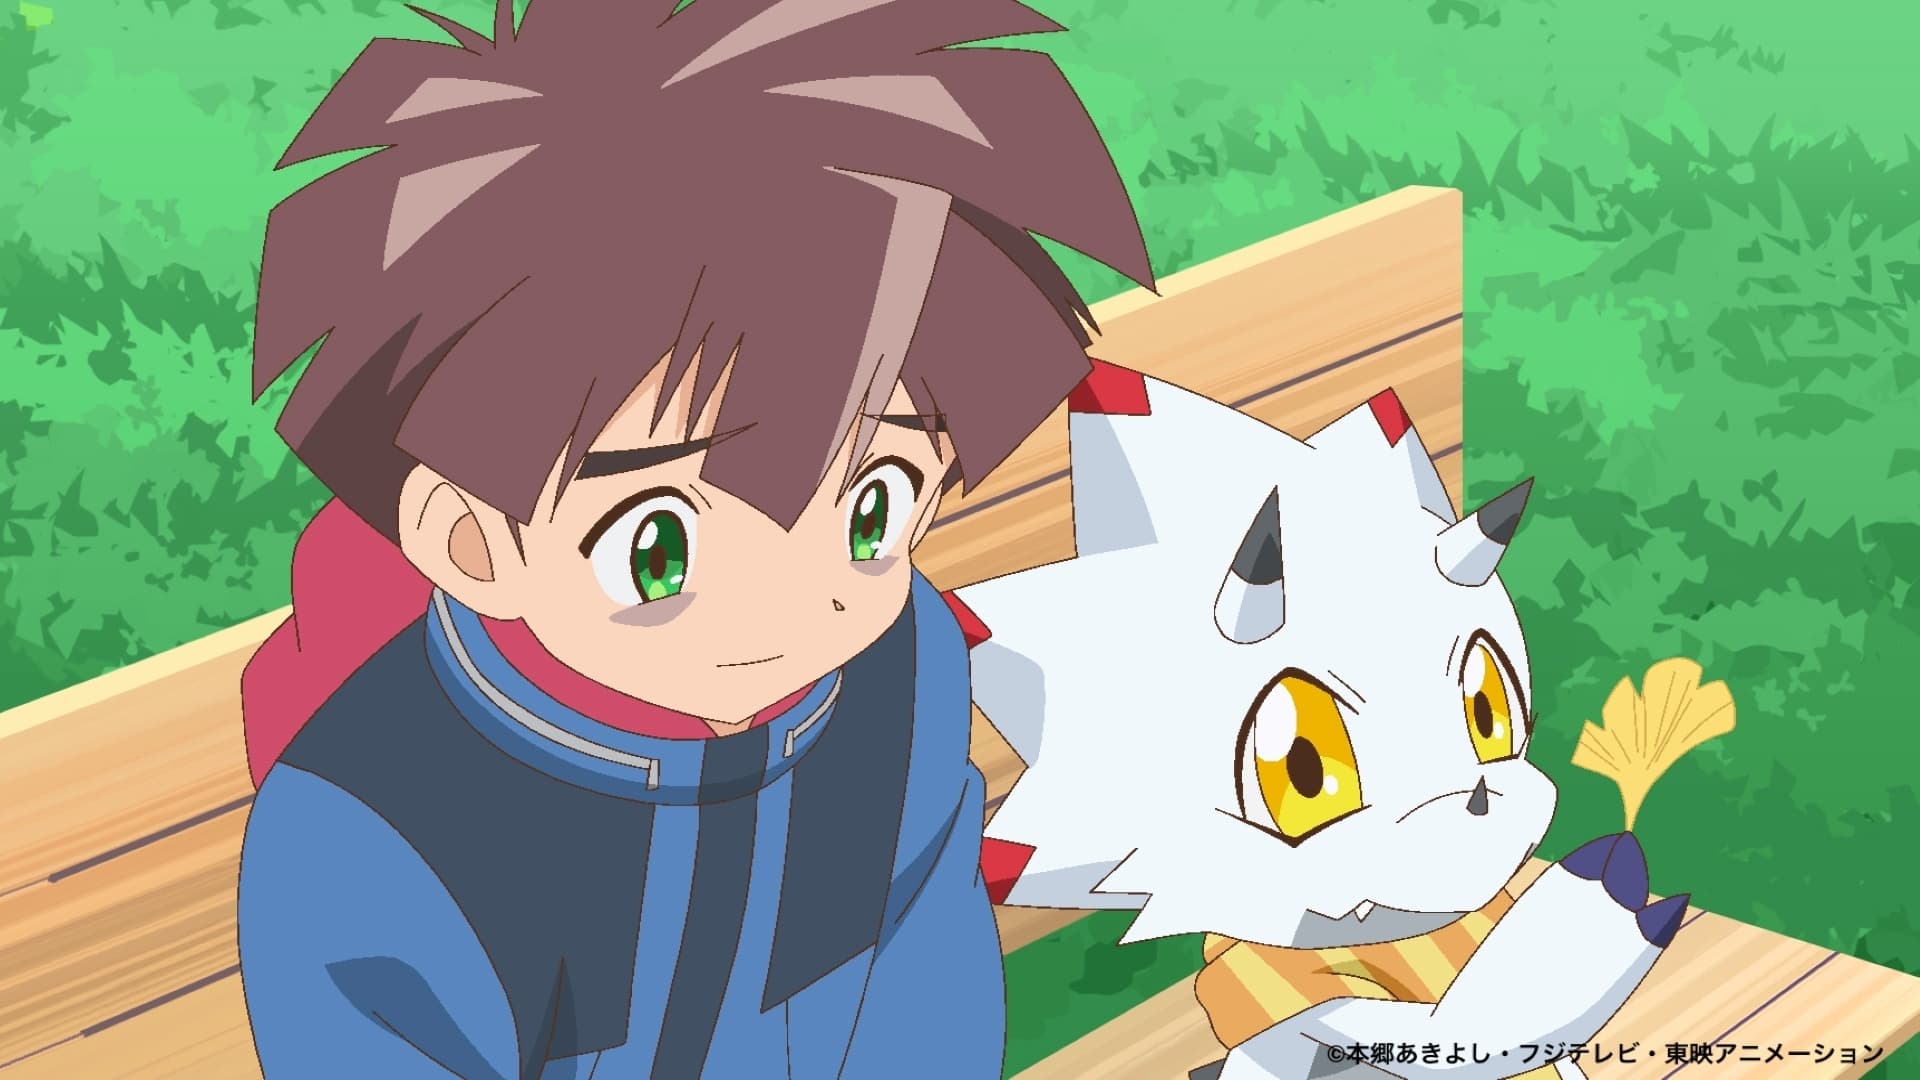 Digimon Ghost Game Episode 67 The Devourer Of All